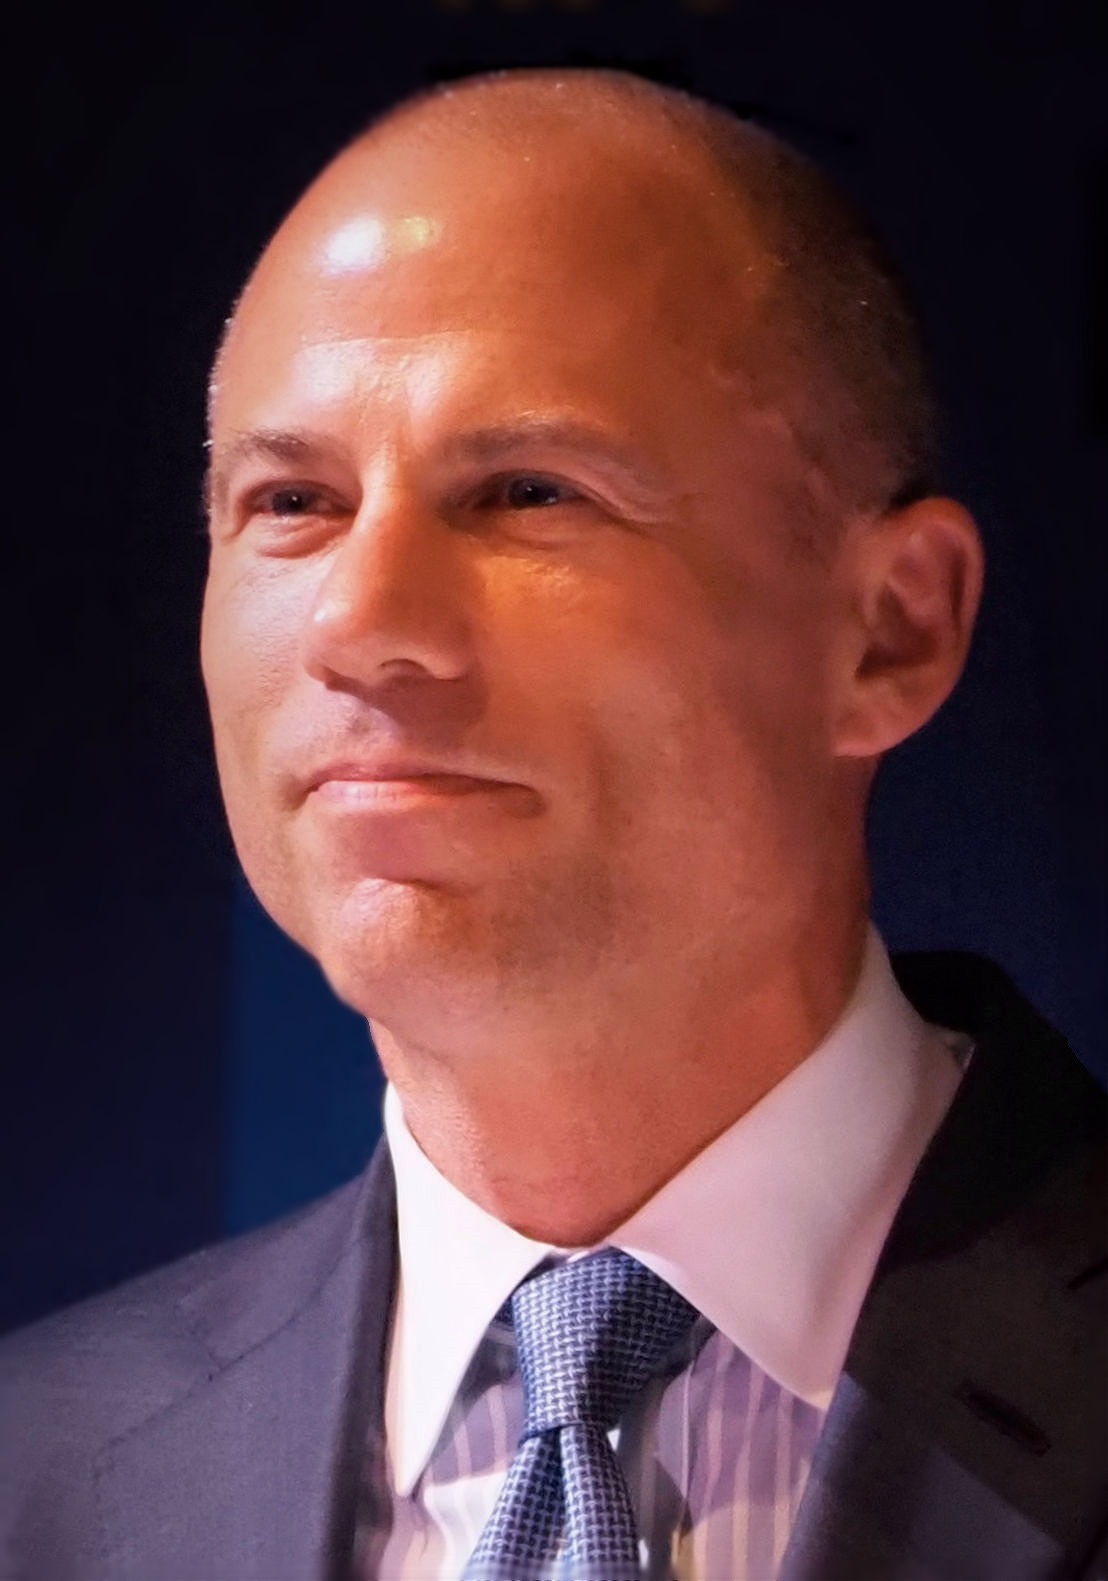 U.S. lawyer Avenatti accused of theft, fraud, tax evasion charges 